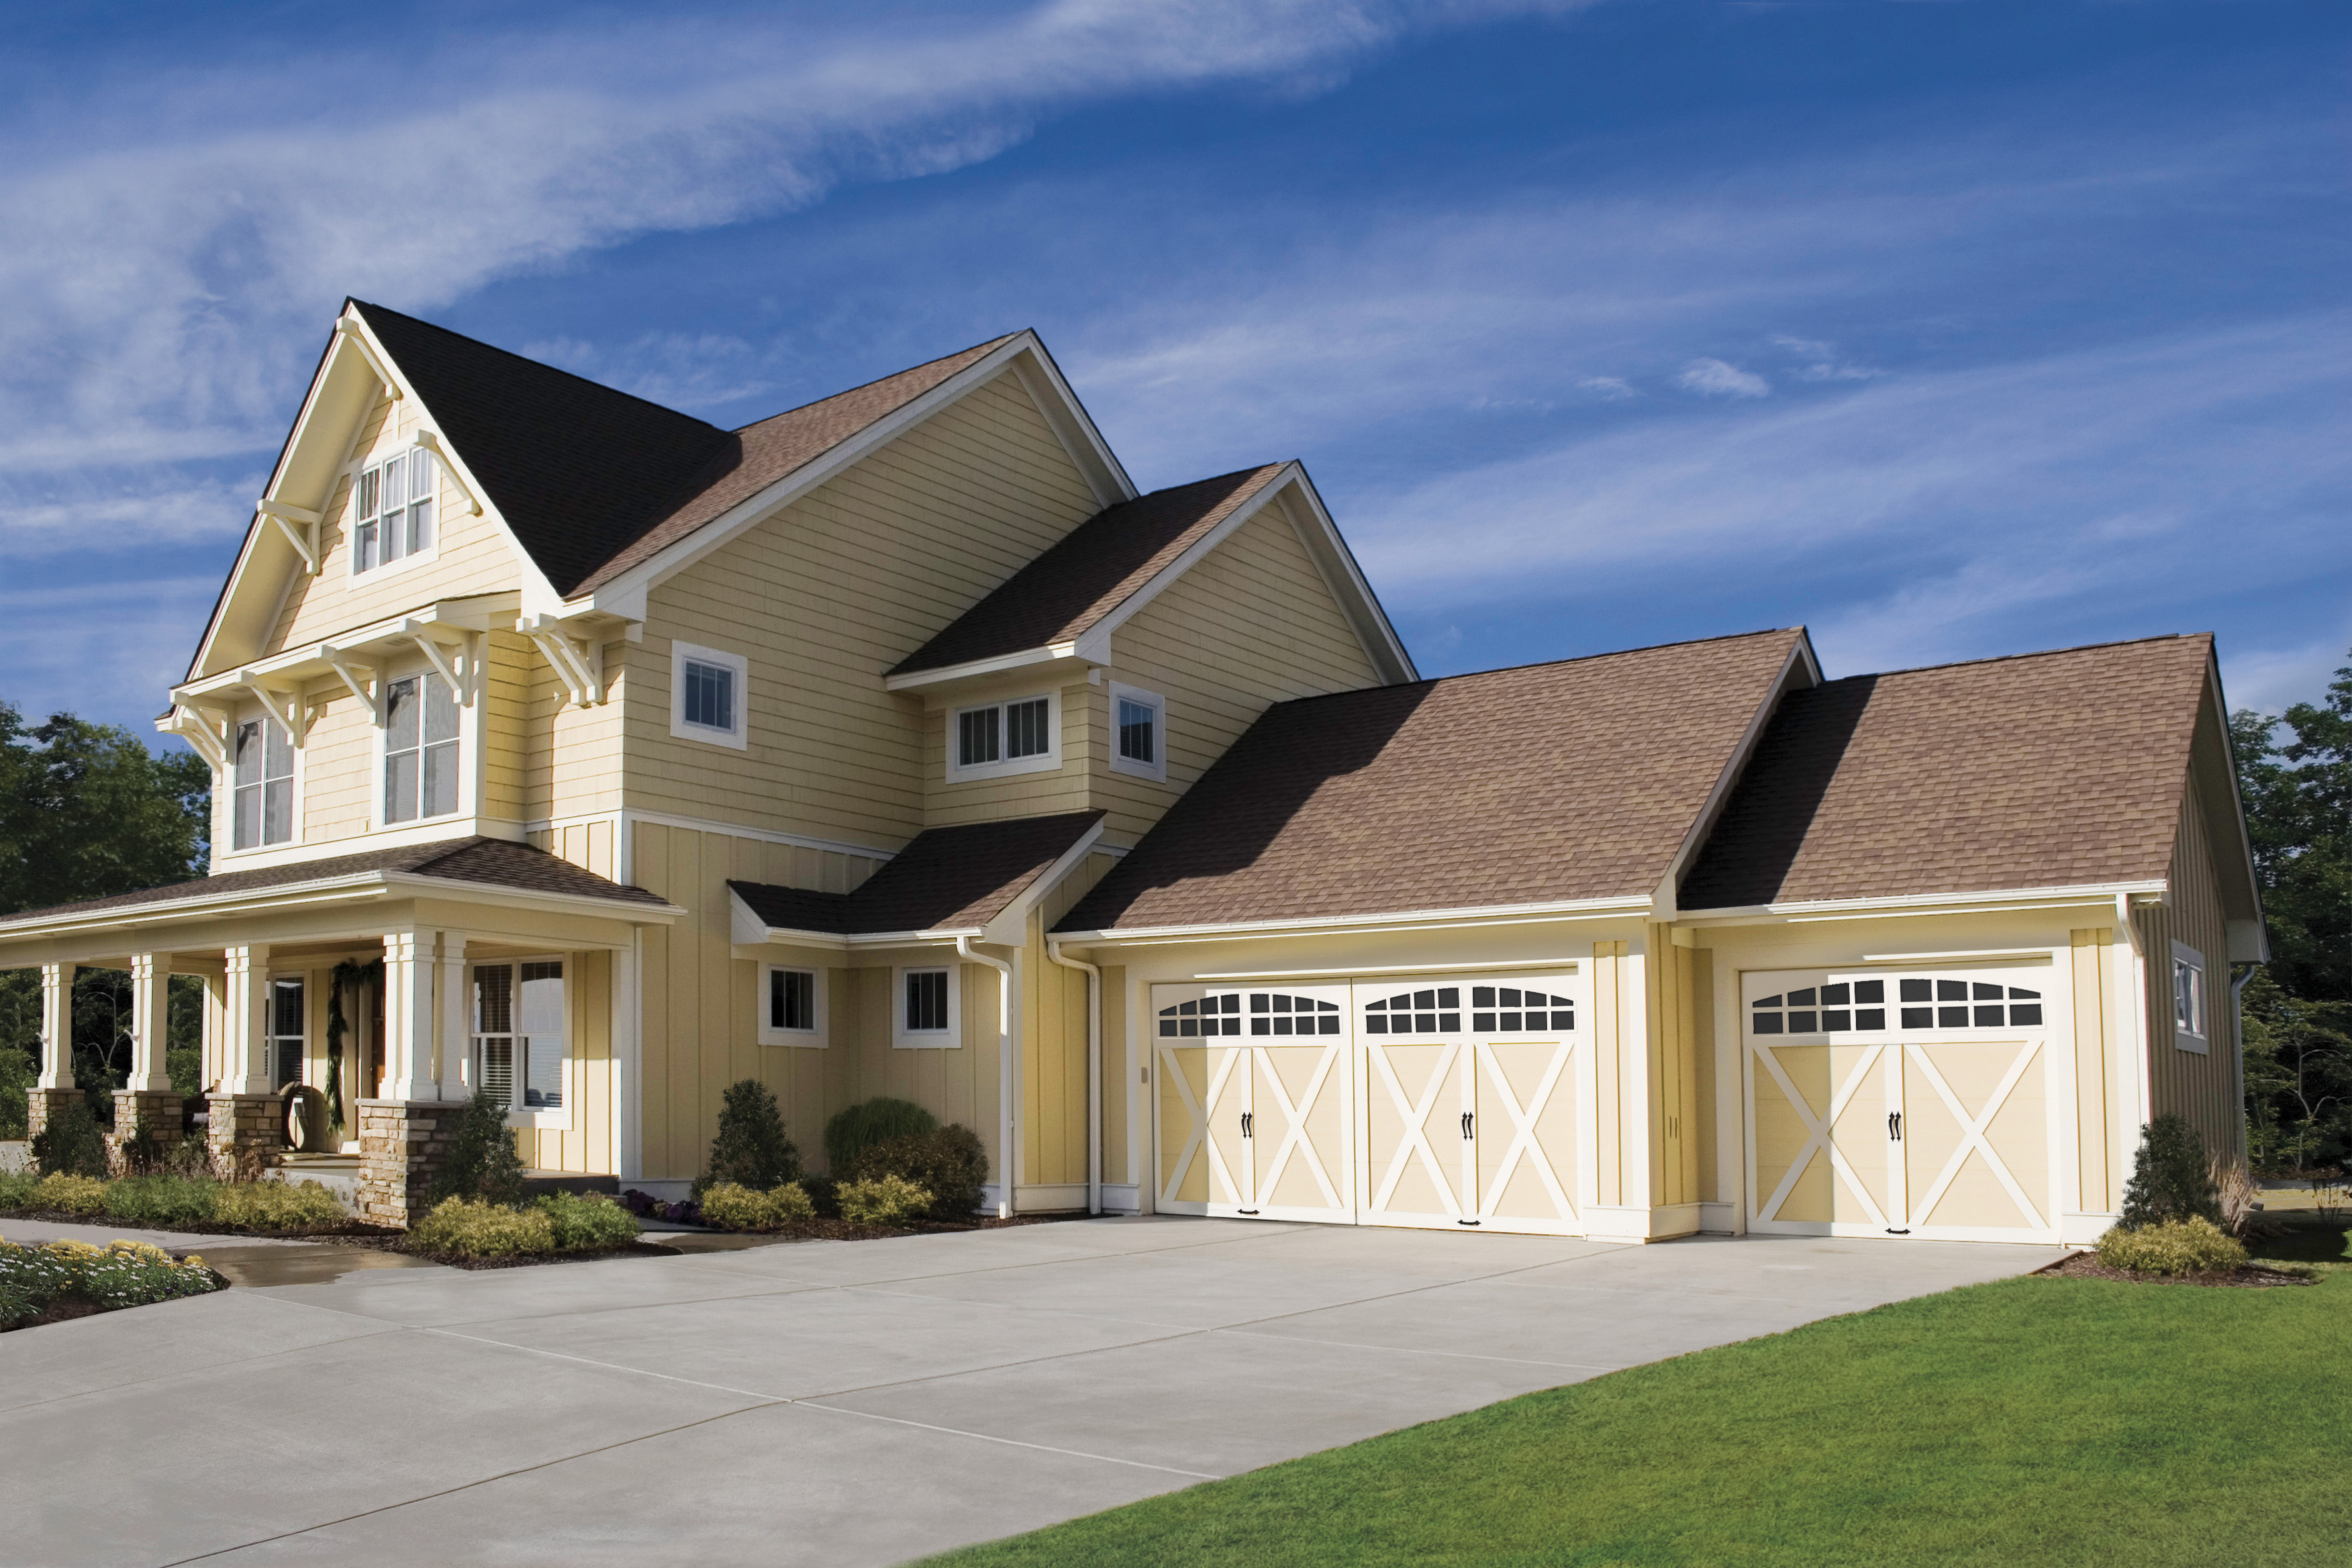 tan and white carriage style garage doors